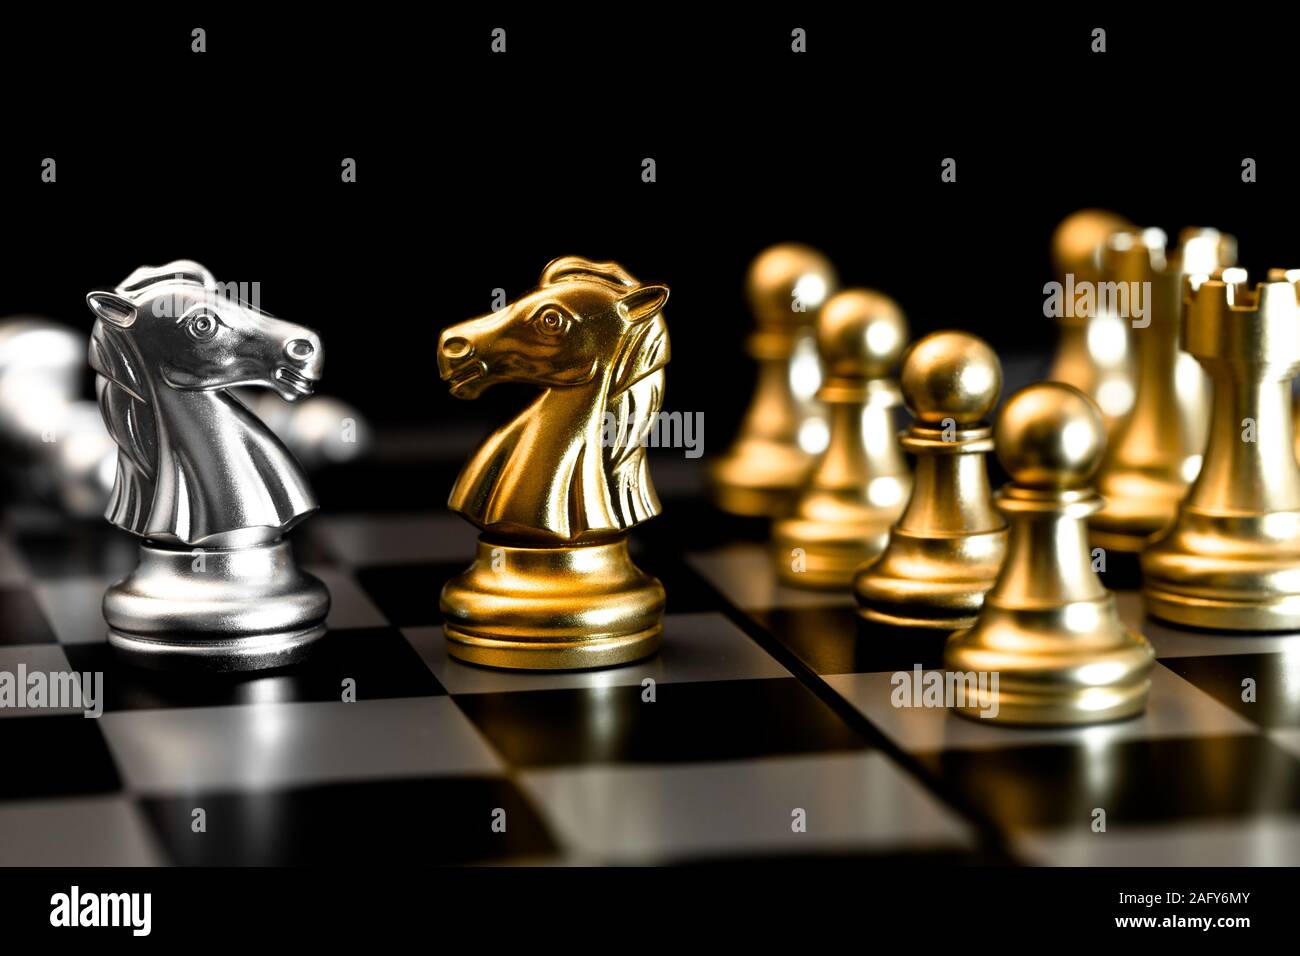 Chess piece represent business confront with competitor, Negotiations encounter people in market trade concept. Stock Photo